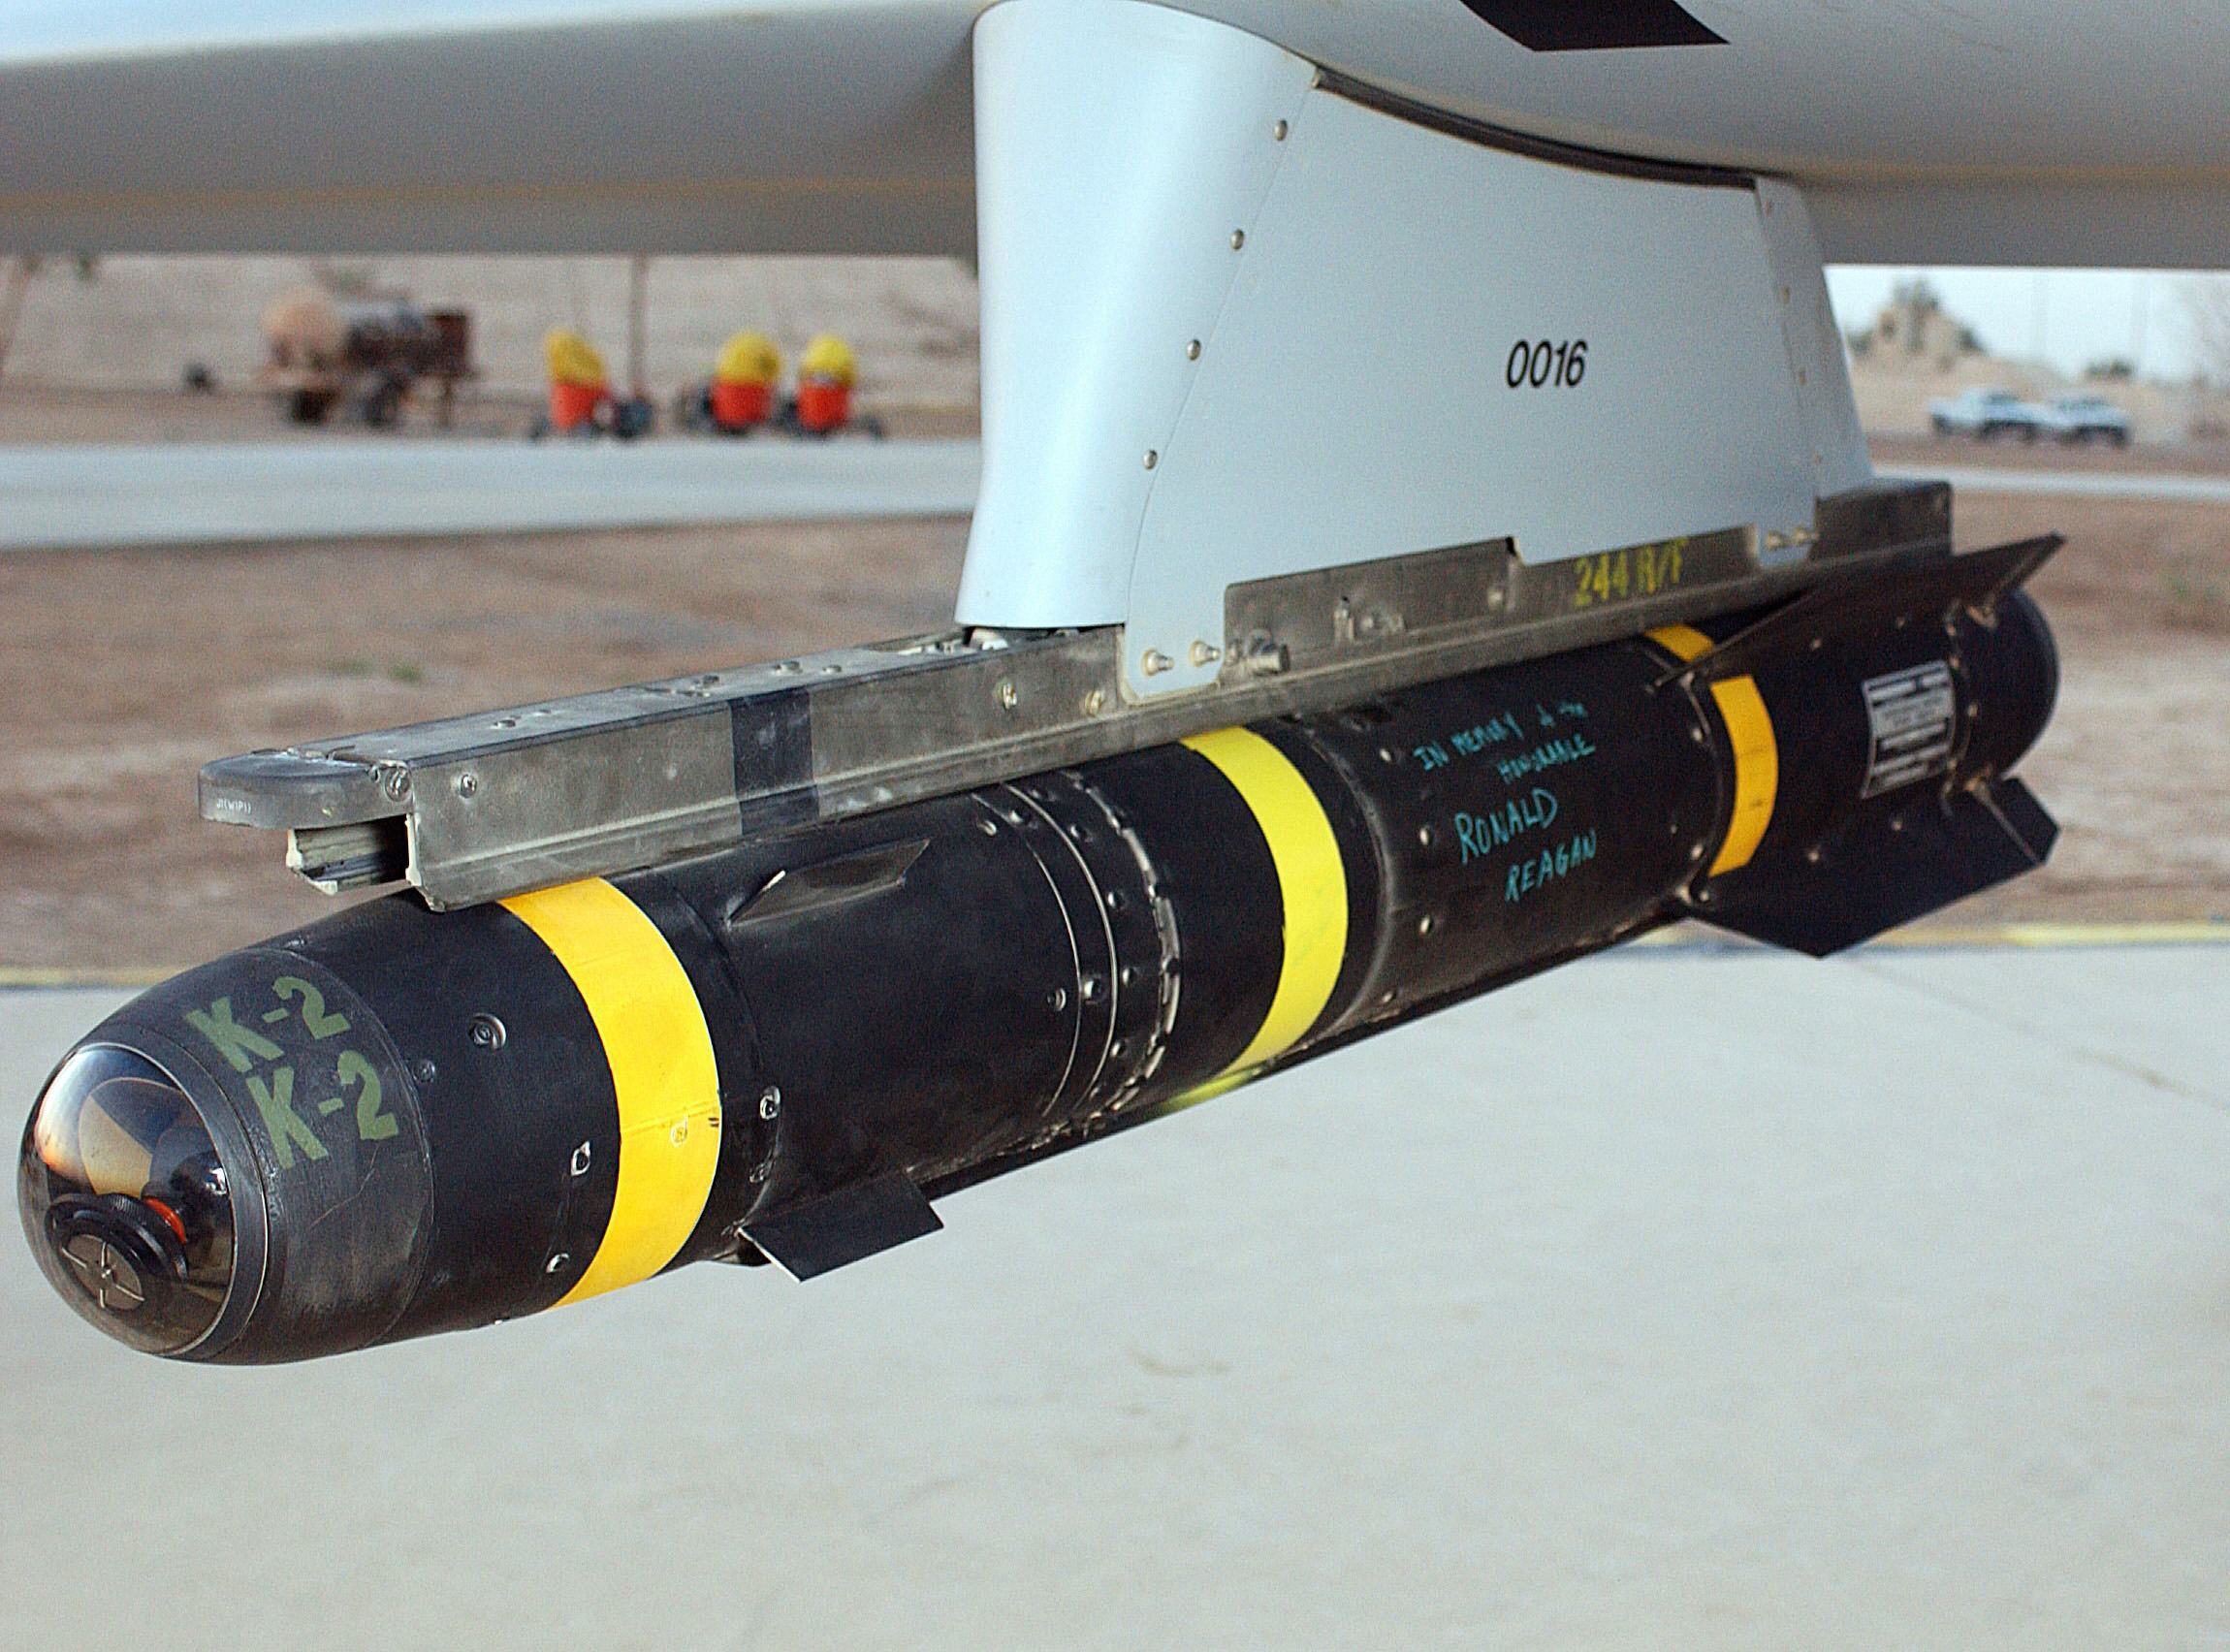 An AGM-114 Hellfire missile hung on the rail of an US Air Force (USAF) MQ-1L Predator Unmanned Aerial Vehicle (UAV) is inscribed with, "IN MEMORY OF HONORABLE RONALD REAGAN."